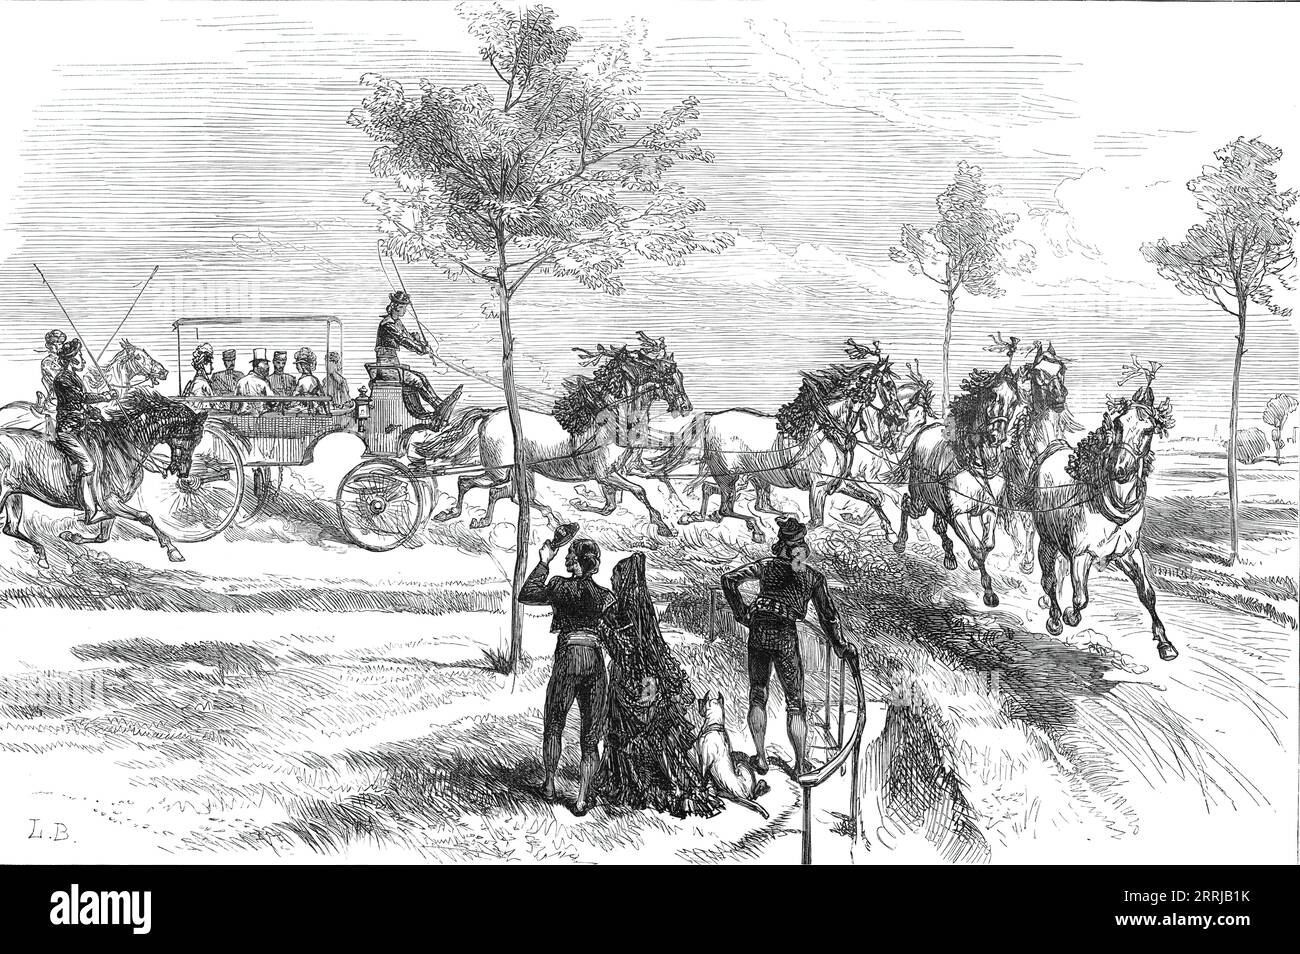 The Prince of Wales at Seville: Driving a Spanish &quot;Turn-Out&quot;, from a sketch by our special artist, 1876. The future King Edward VII takes part in amusements in Spain: '...an outlandish kind of Spanish &quot;turn-out&quot;...[which] consisted of an ordinary brake or omnibus drawn by seven greys, put in pairs with the odd one leading. The horses were hung all over the head and the massive collar with large bunches of red tassels, the simple harness was of rope, and so were the reins. The coachman, who was dressed in a short jacket with a broad waistbelt and flat black velvet hat, duly Stock Photo